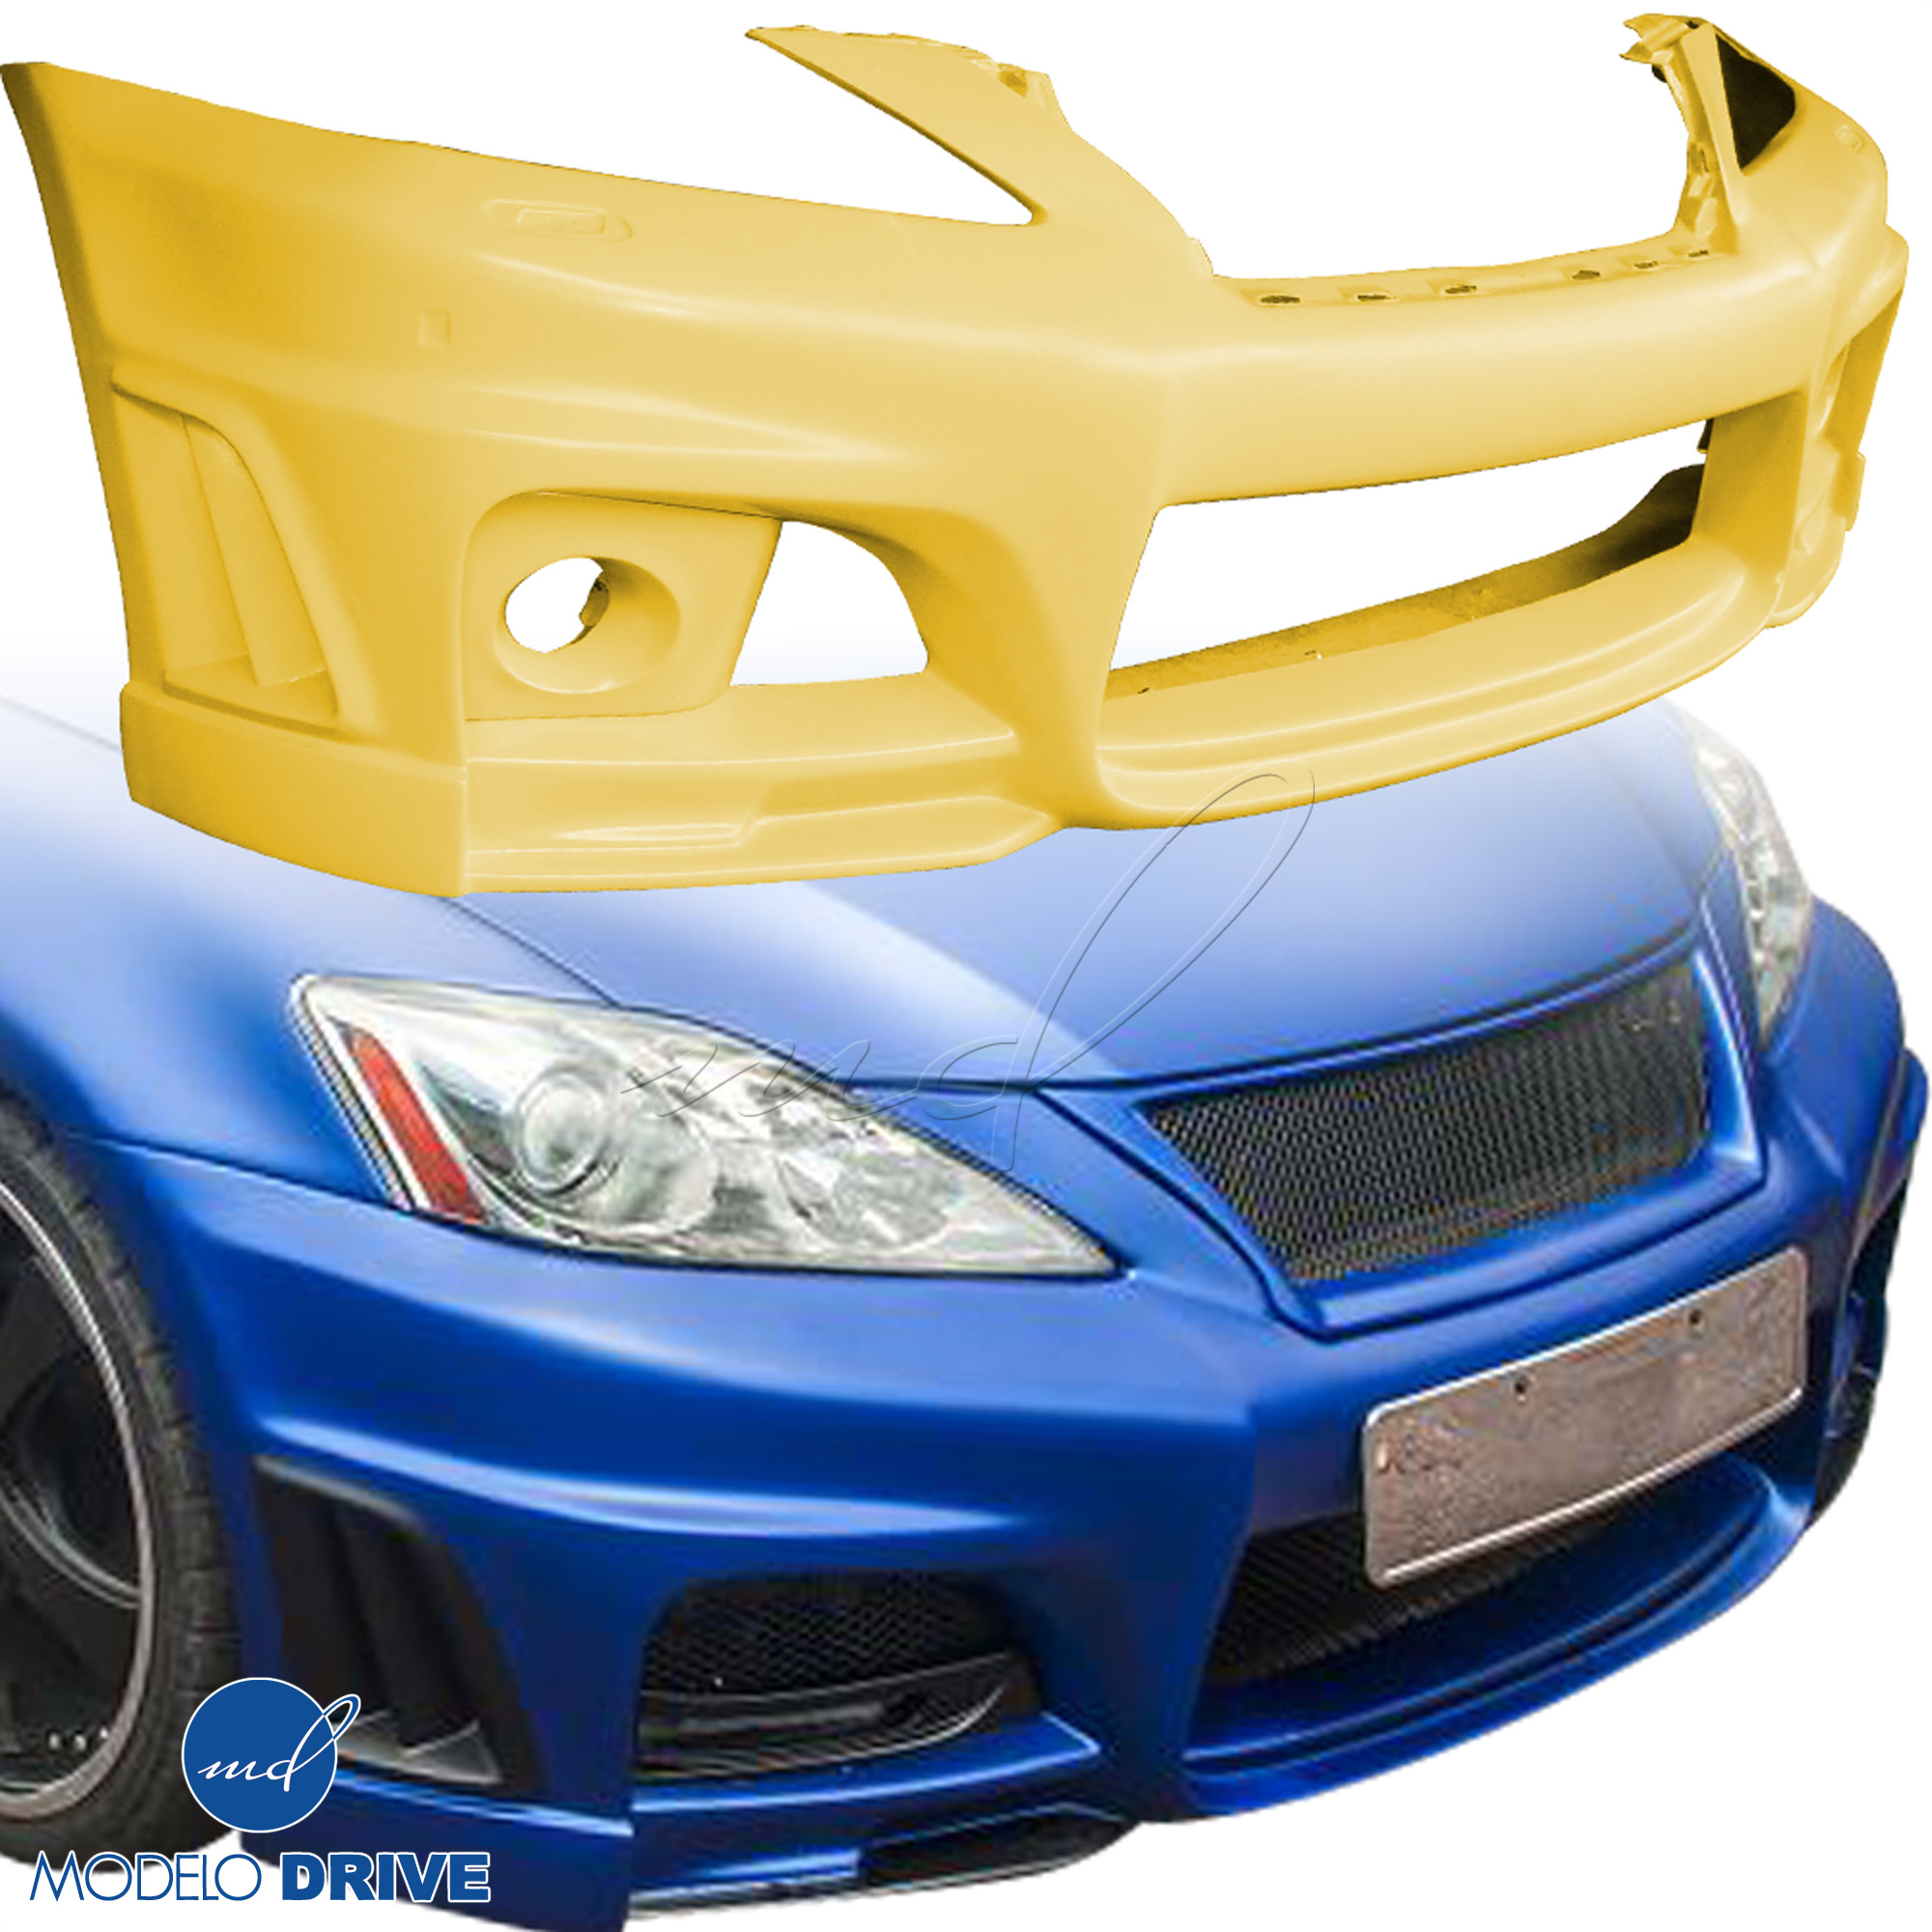 ModeloDrive FRP WAL BISO Front Bumper > Lexus IS F 2012-2013 - Image 1